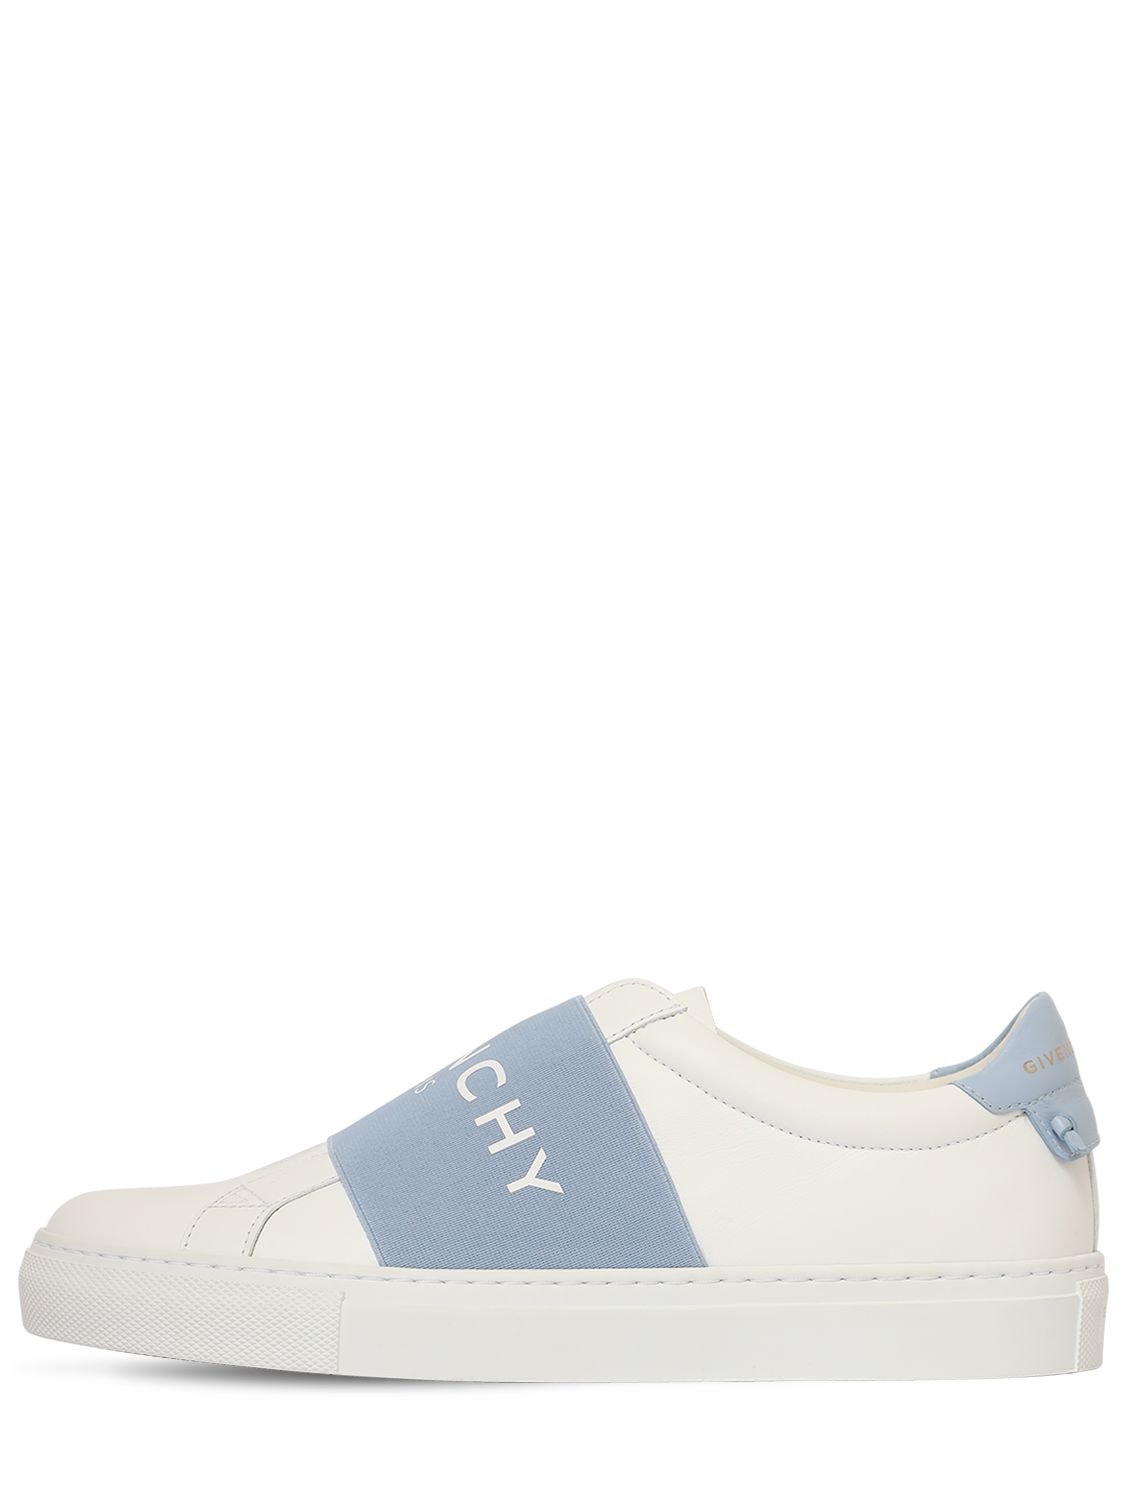 Givenchy 20mm Urban Street Logo Leather Sneakers In White,sky Blue